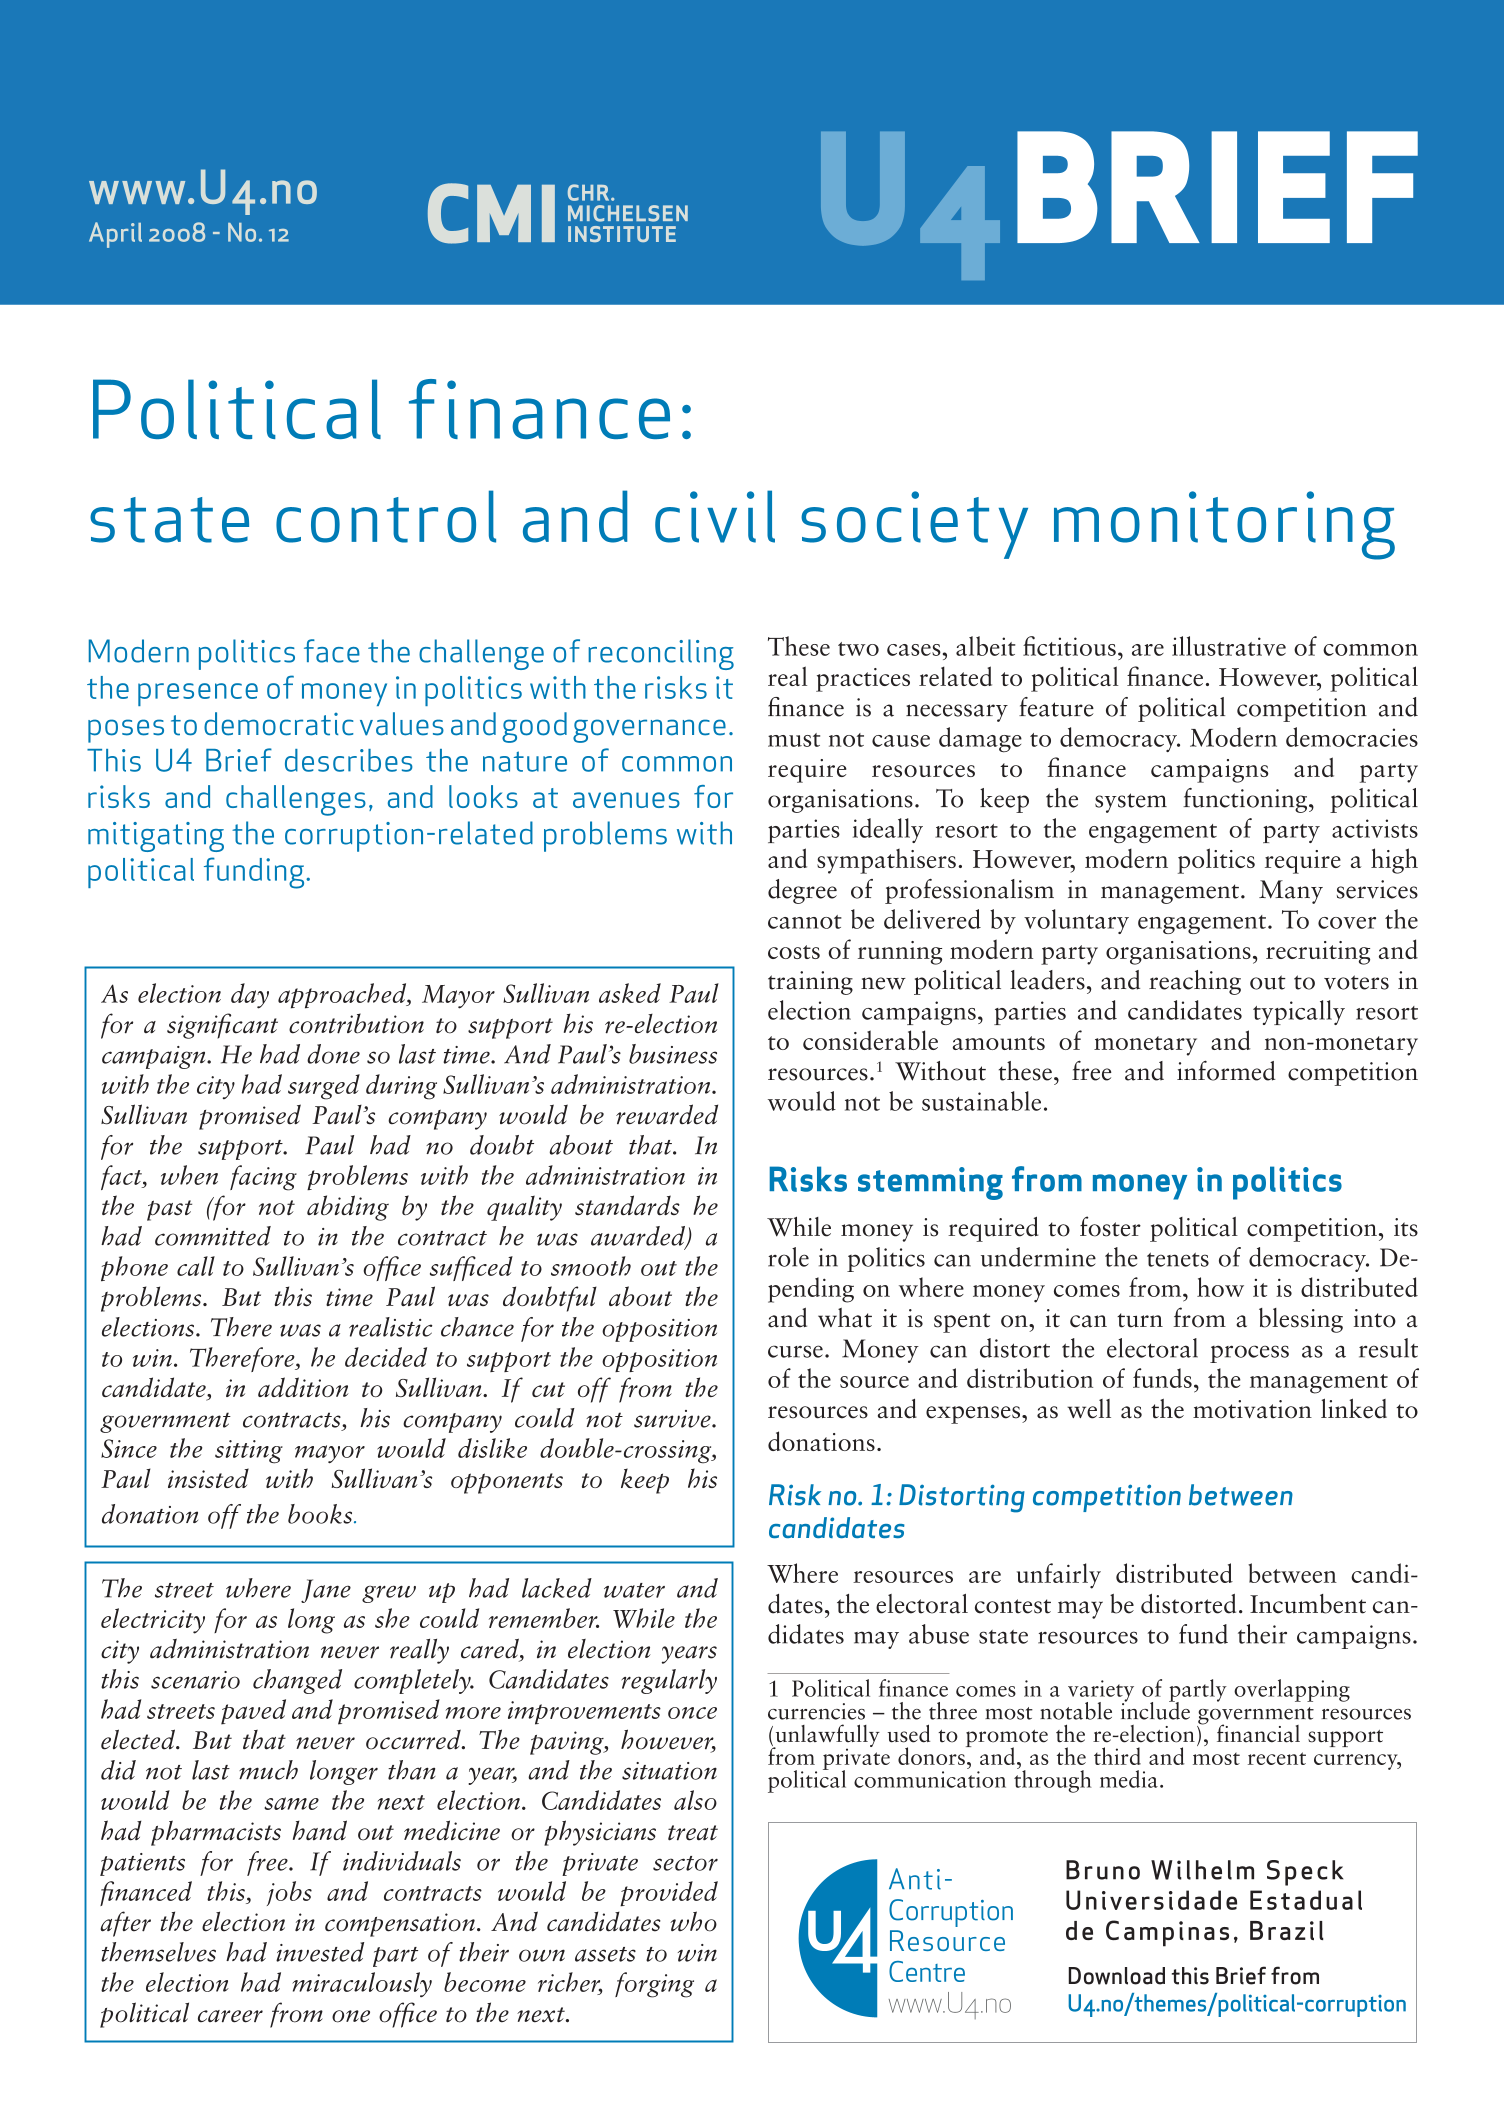 Political finance: State control and civil society monitoring